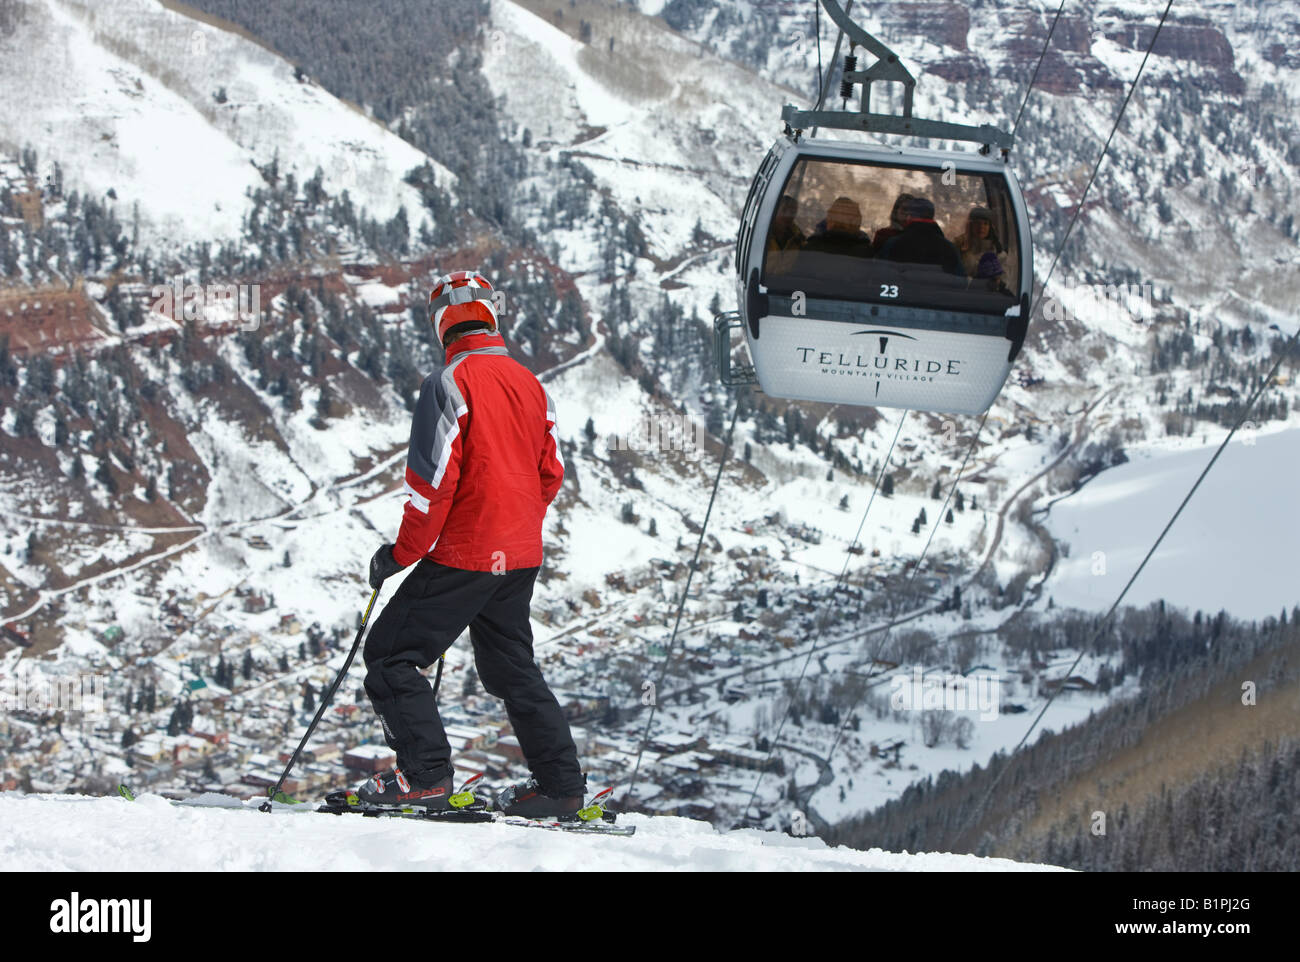 A skier watches a gondola rise above the town of Telluride at the Telluride Ski Resort, Colorado, USA. Stock Photo